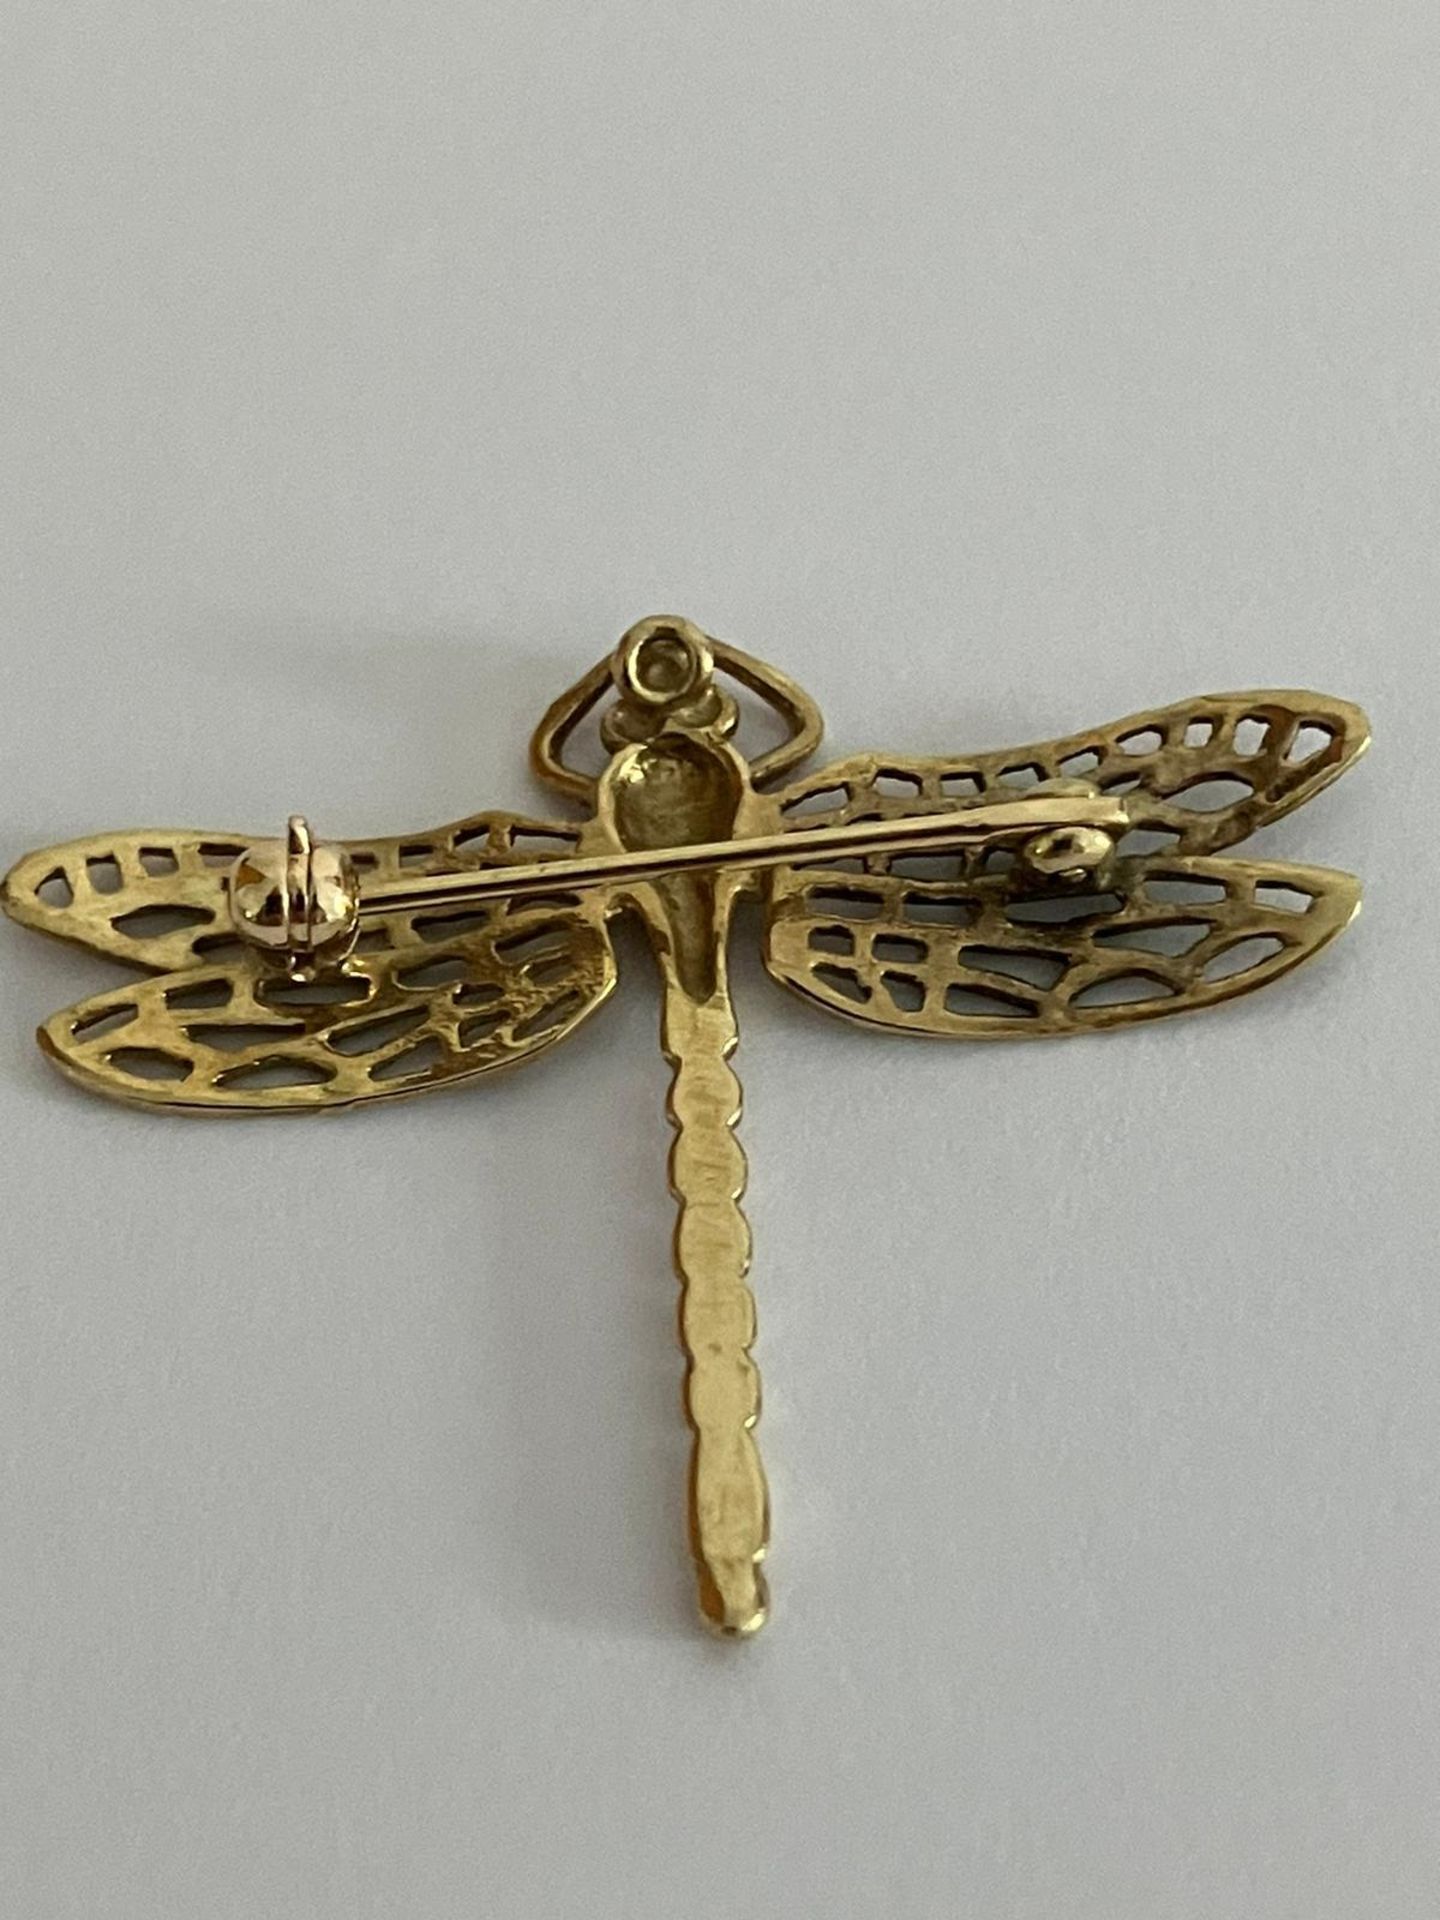 9 carat YELLOW GOLD FIREFLY BROOCH Having beautiful filigree wings complete with full UK hallmark. - Image 3 of 5